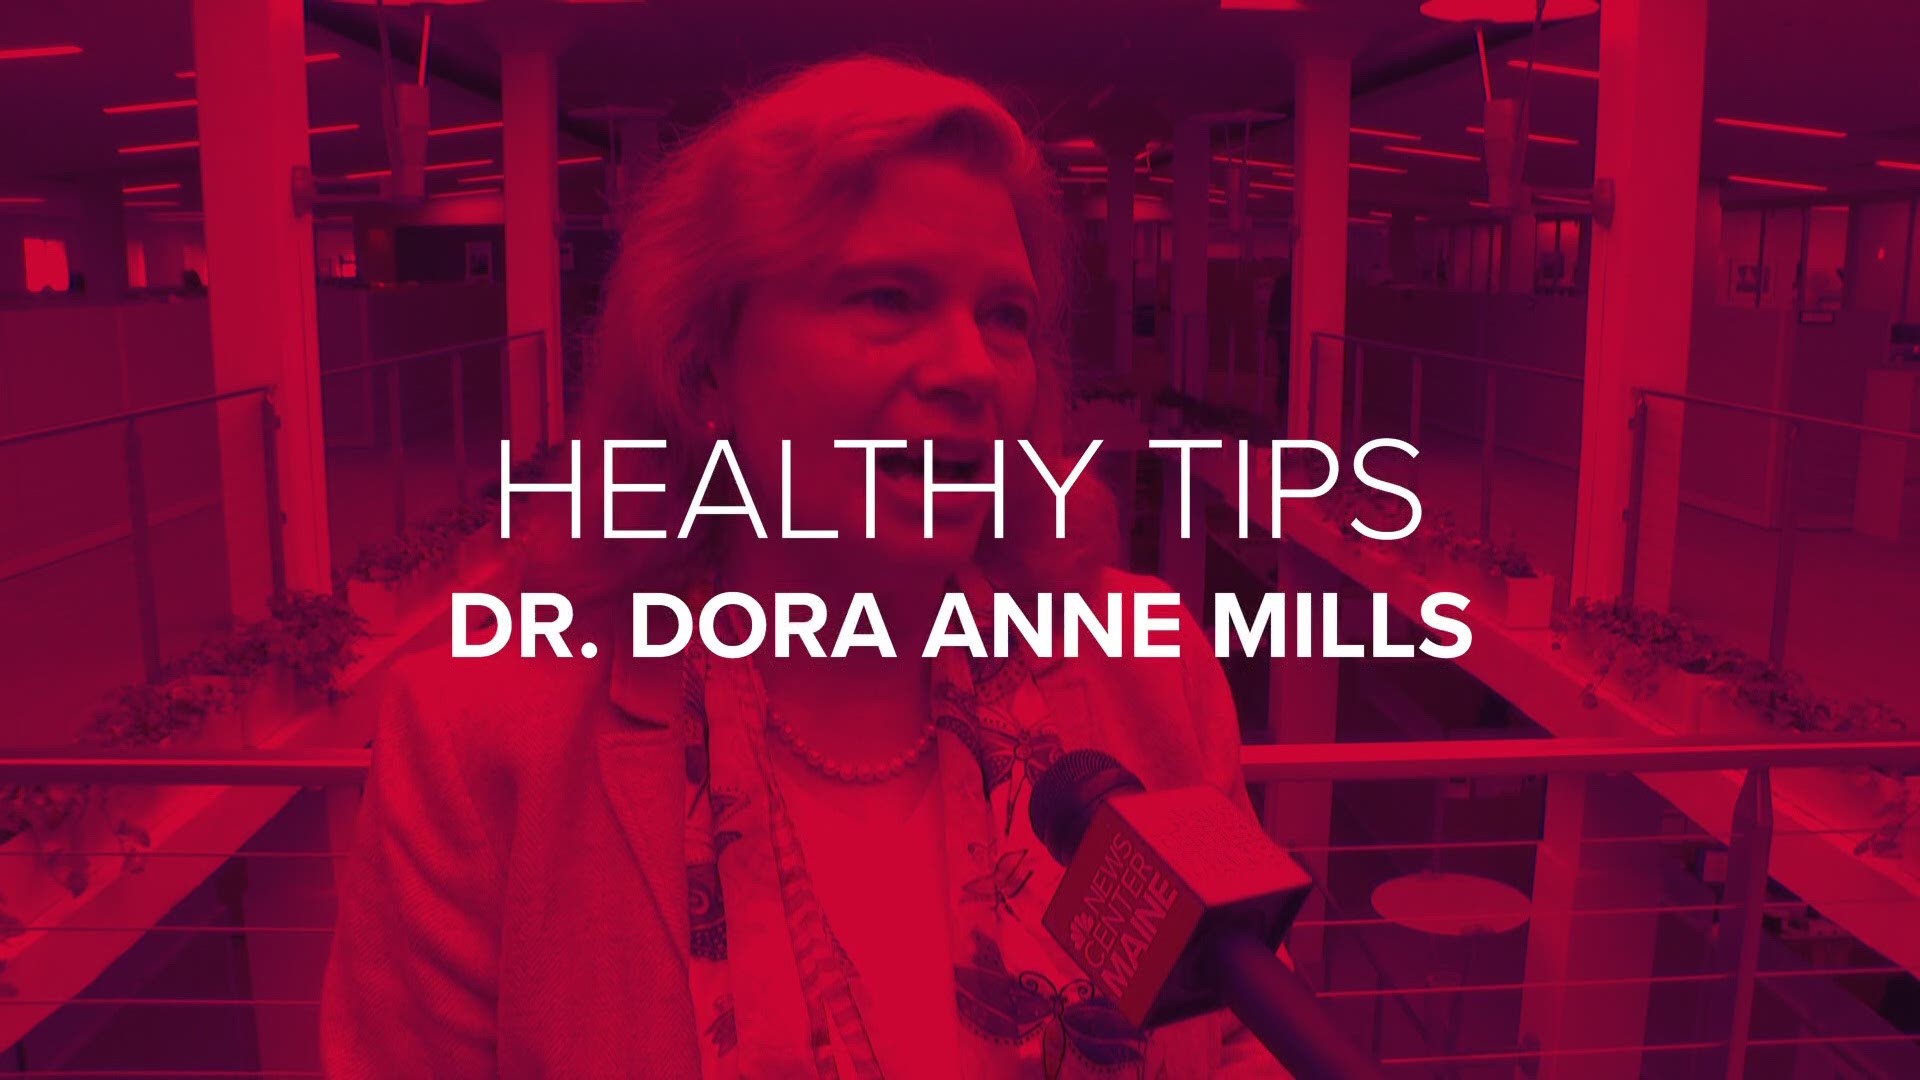 Avoiding sickness tips with Dr. Dora Anne Mills.